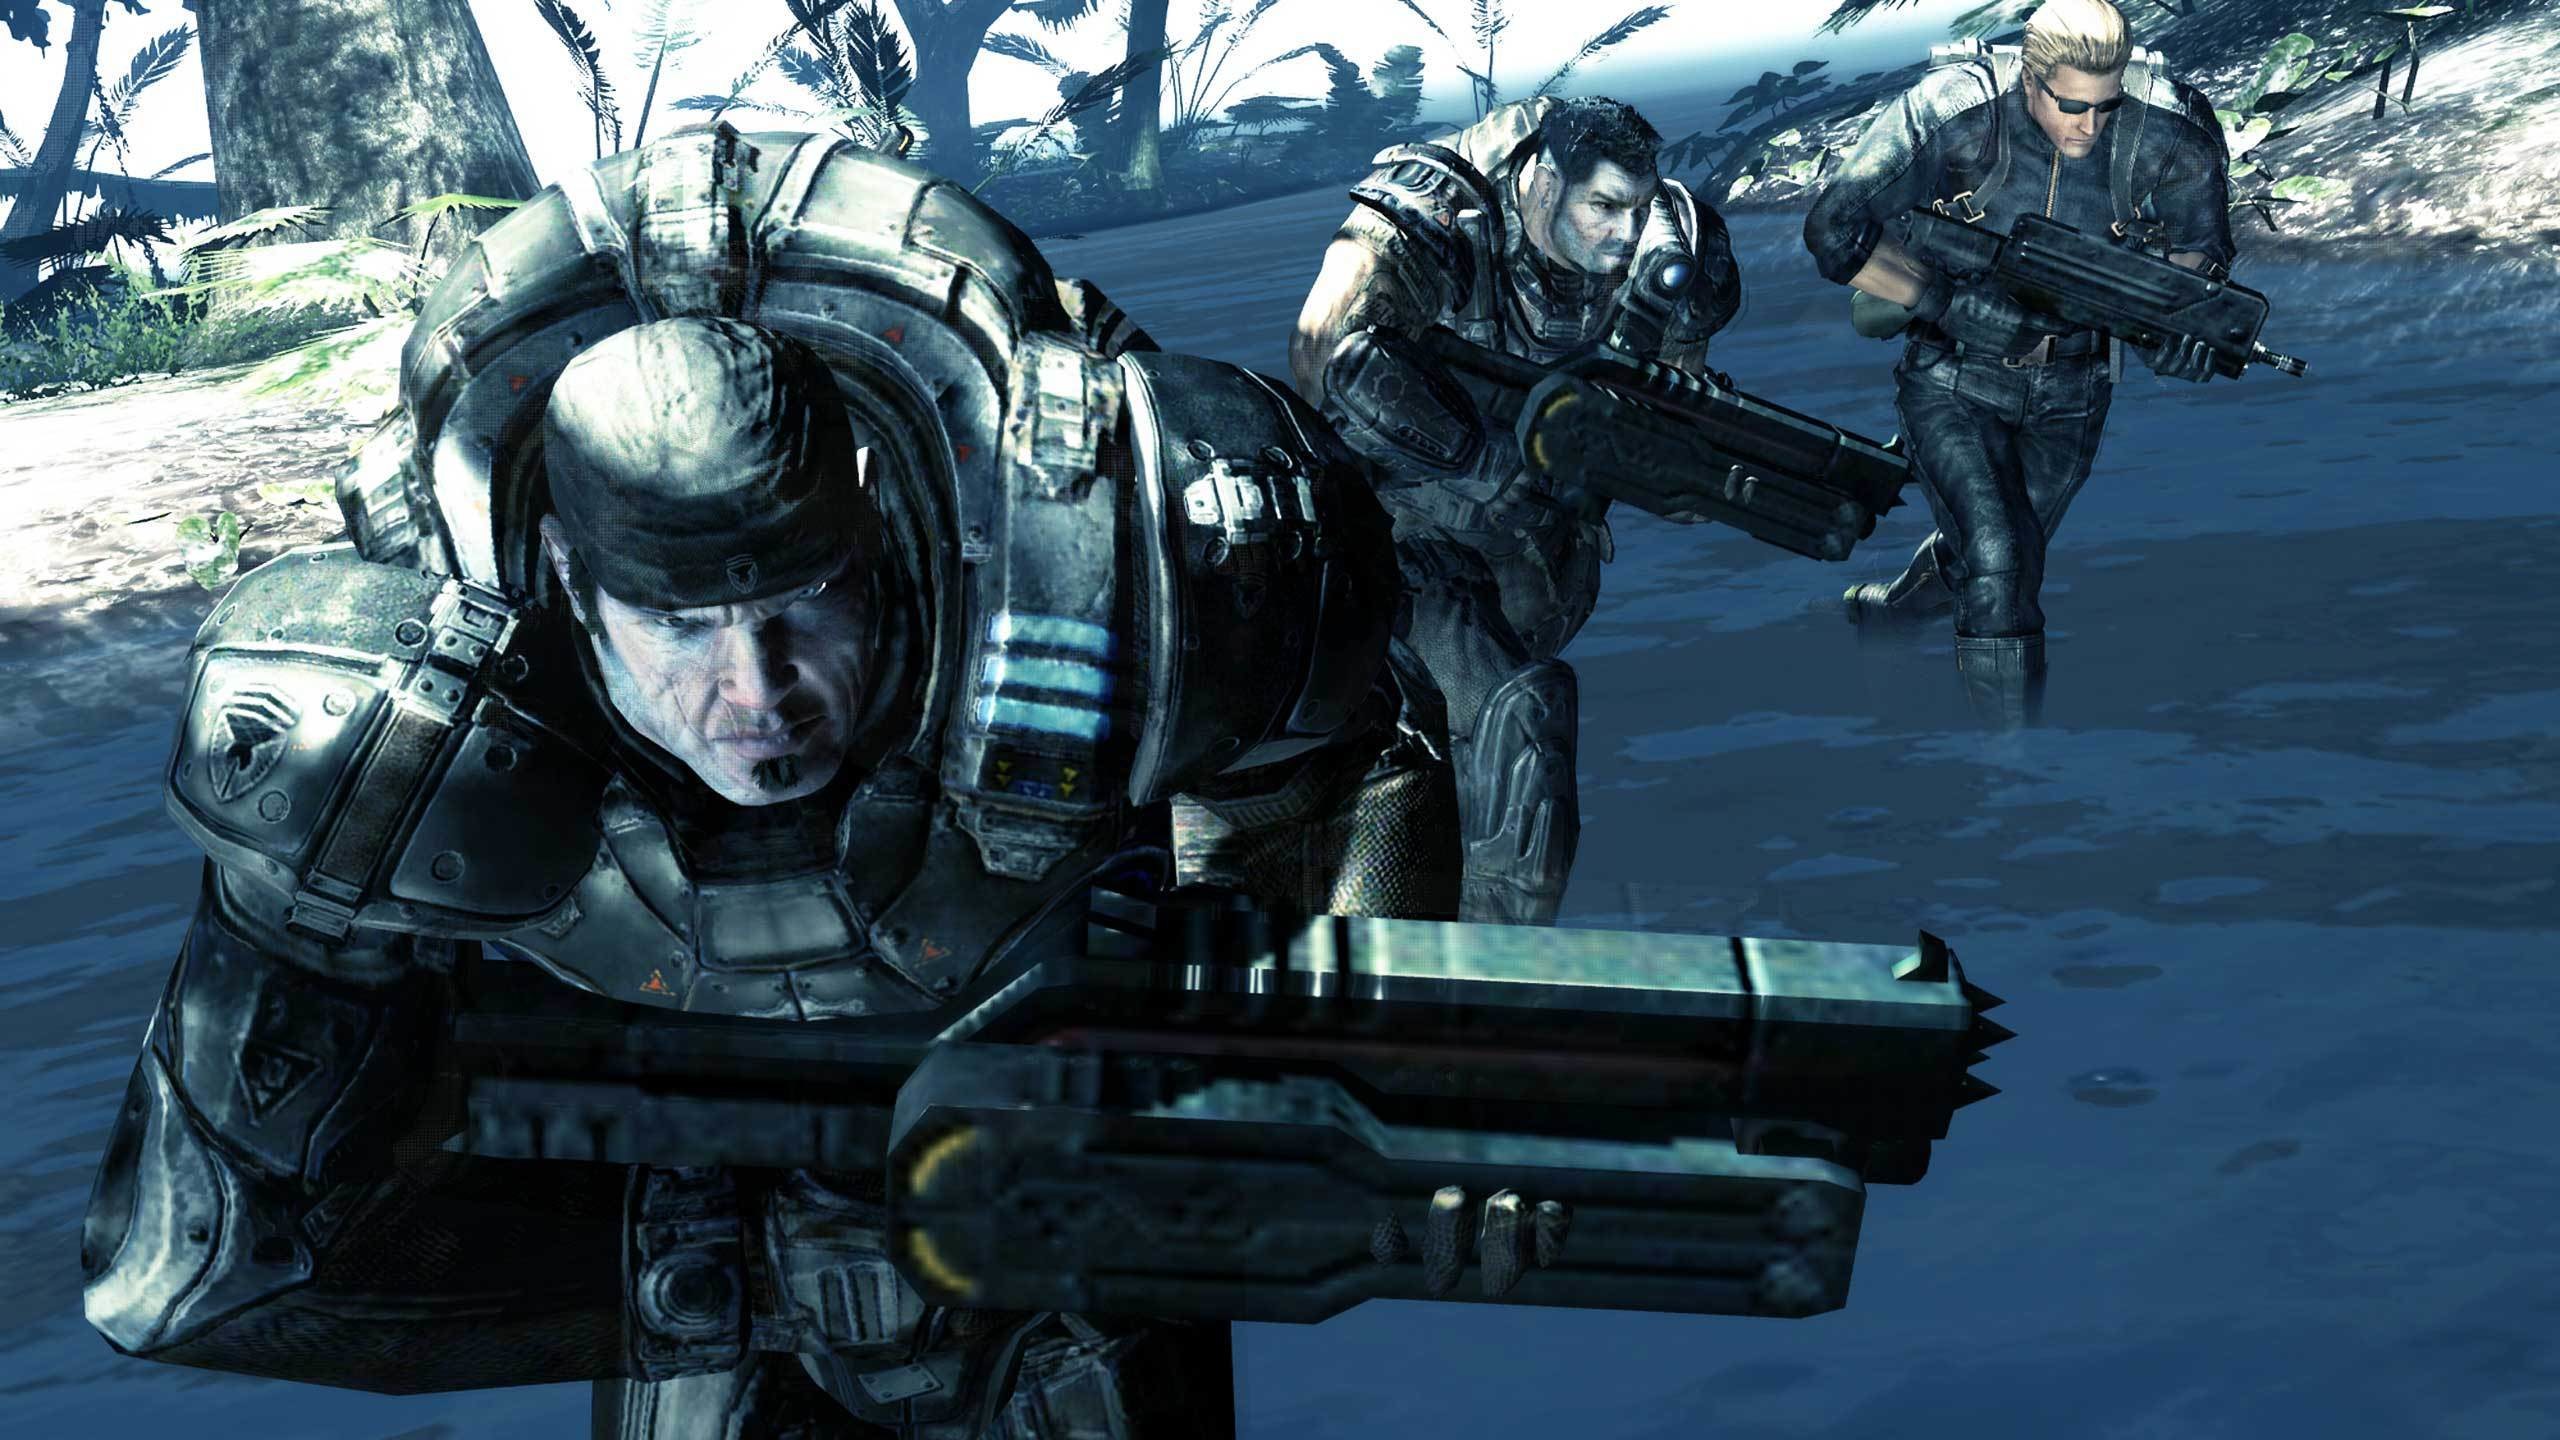 Lost Planet Images Gears Of War Hits Lost Planet 2 Hd Wallpaper And Background Photos 2560x1440